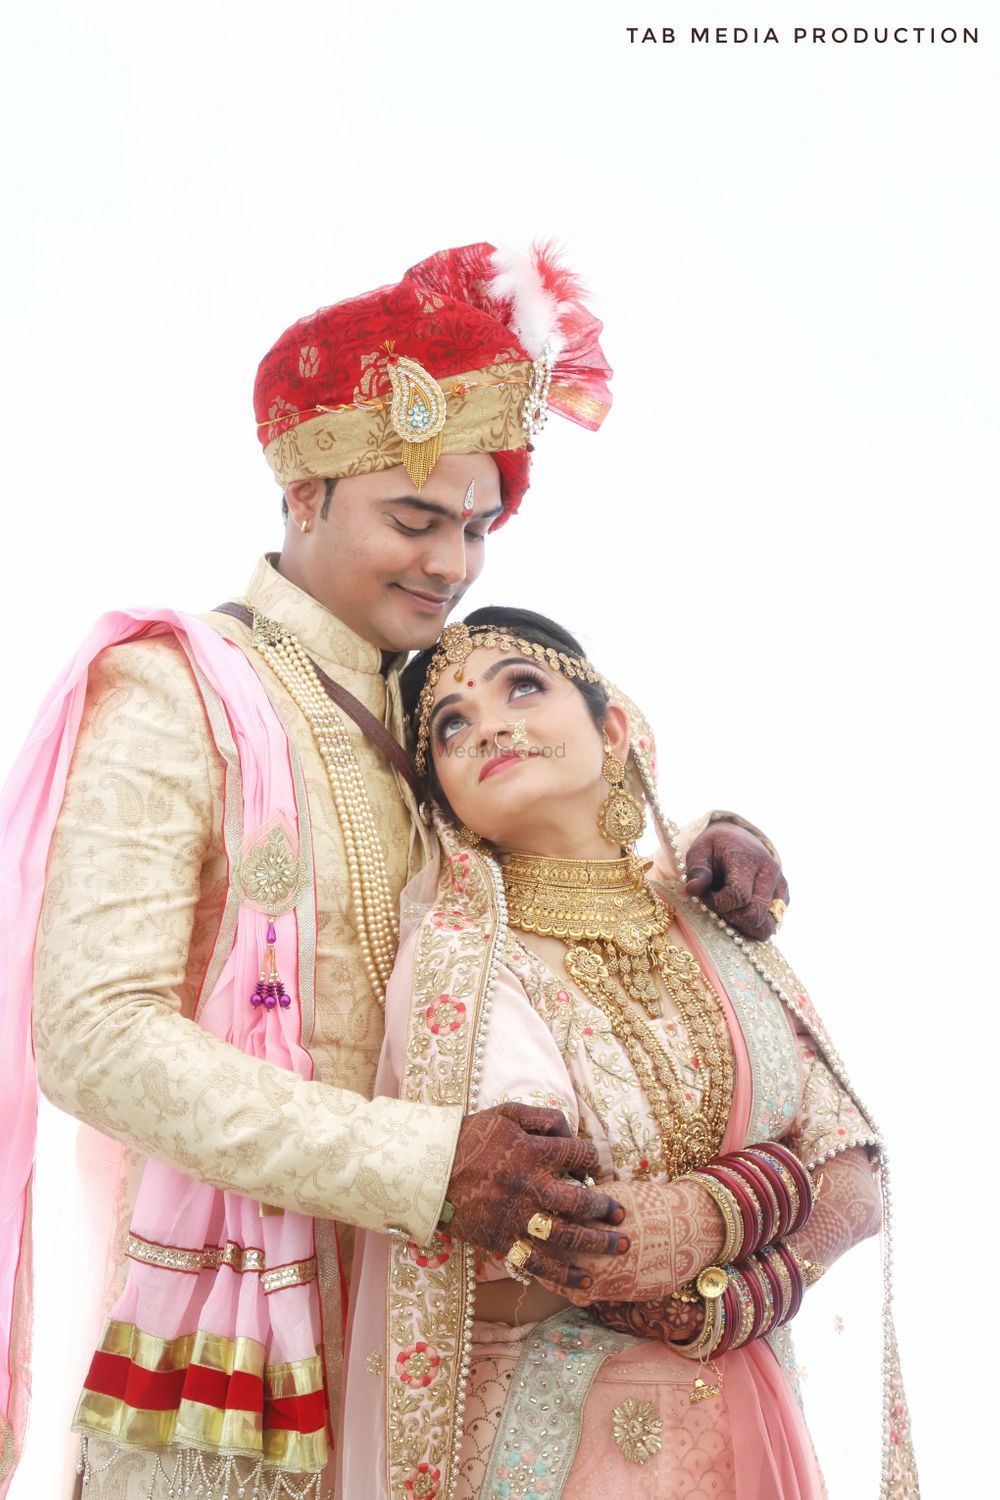 Photo From Tradisional Hindu wedding - By Tab Media Production